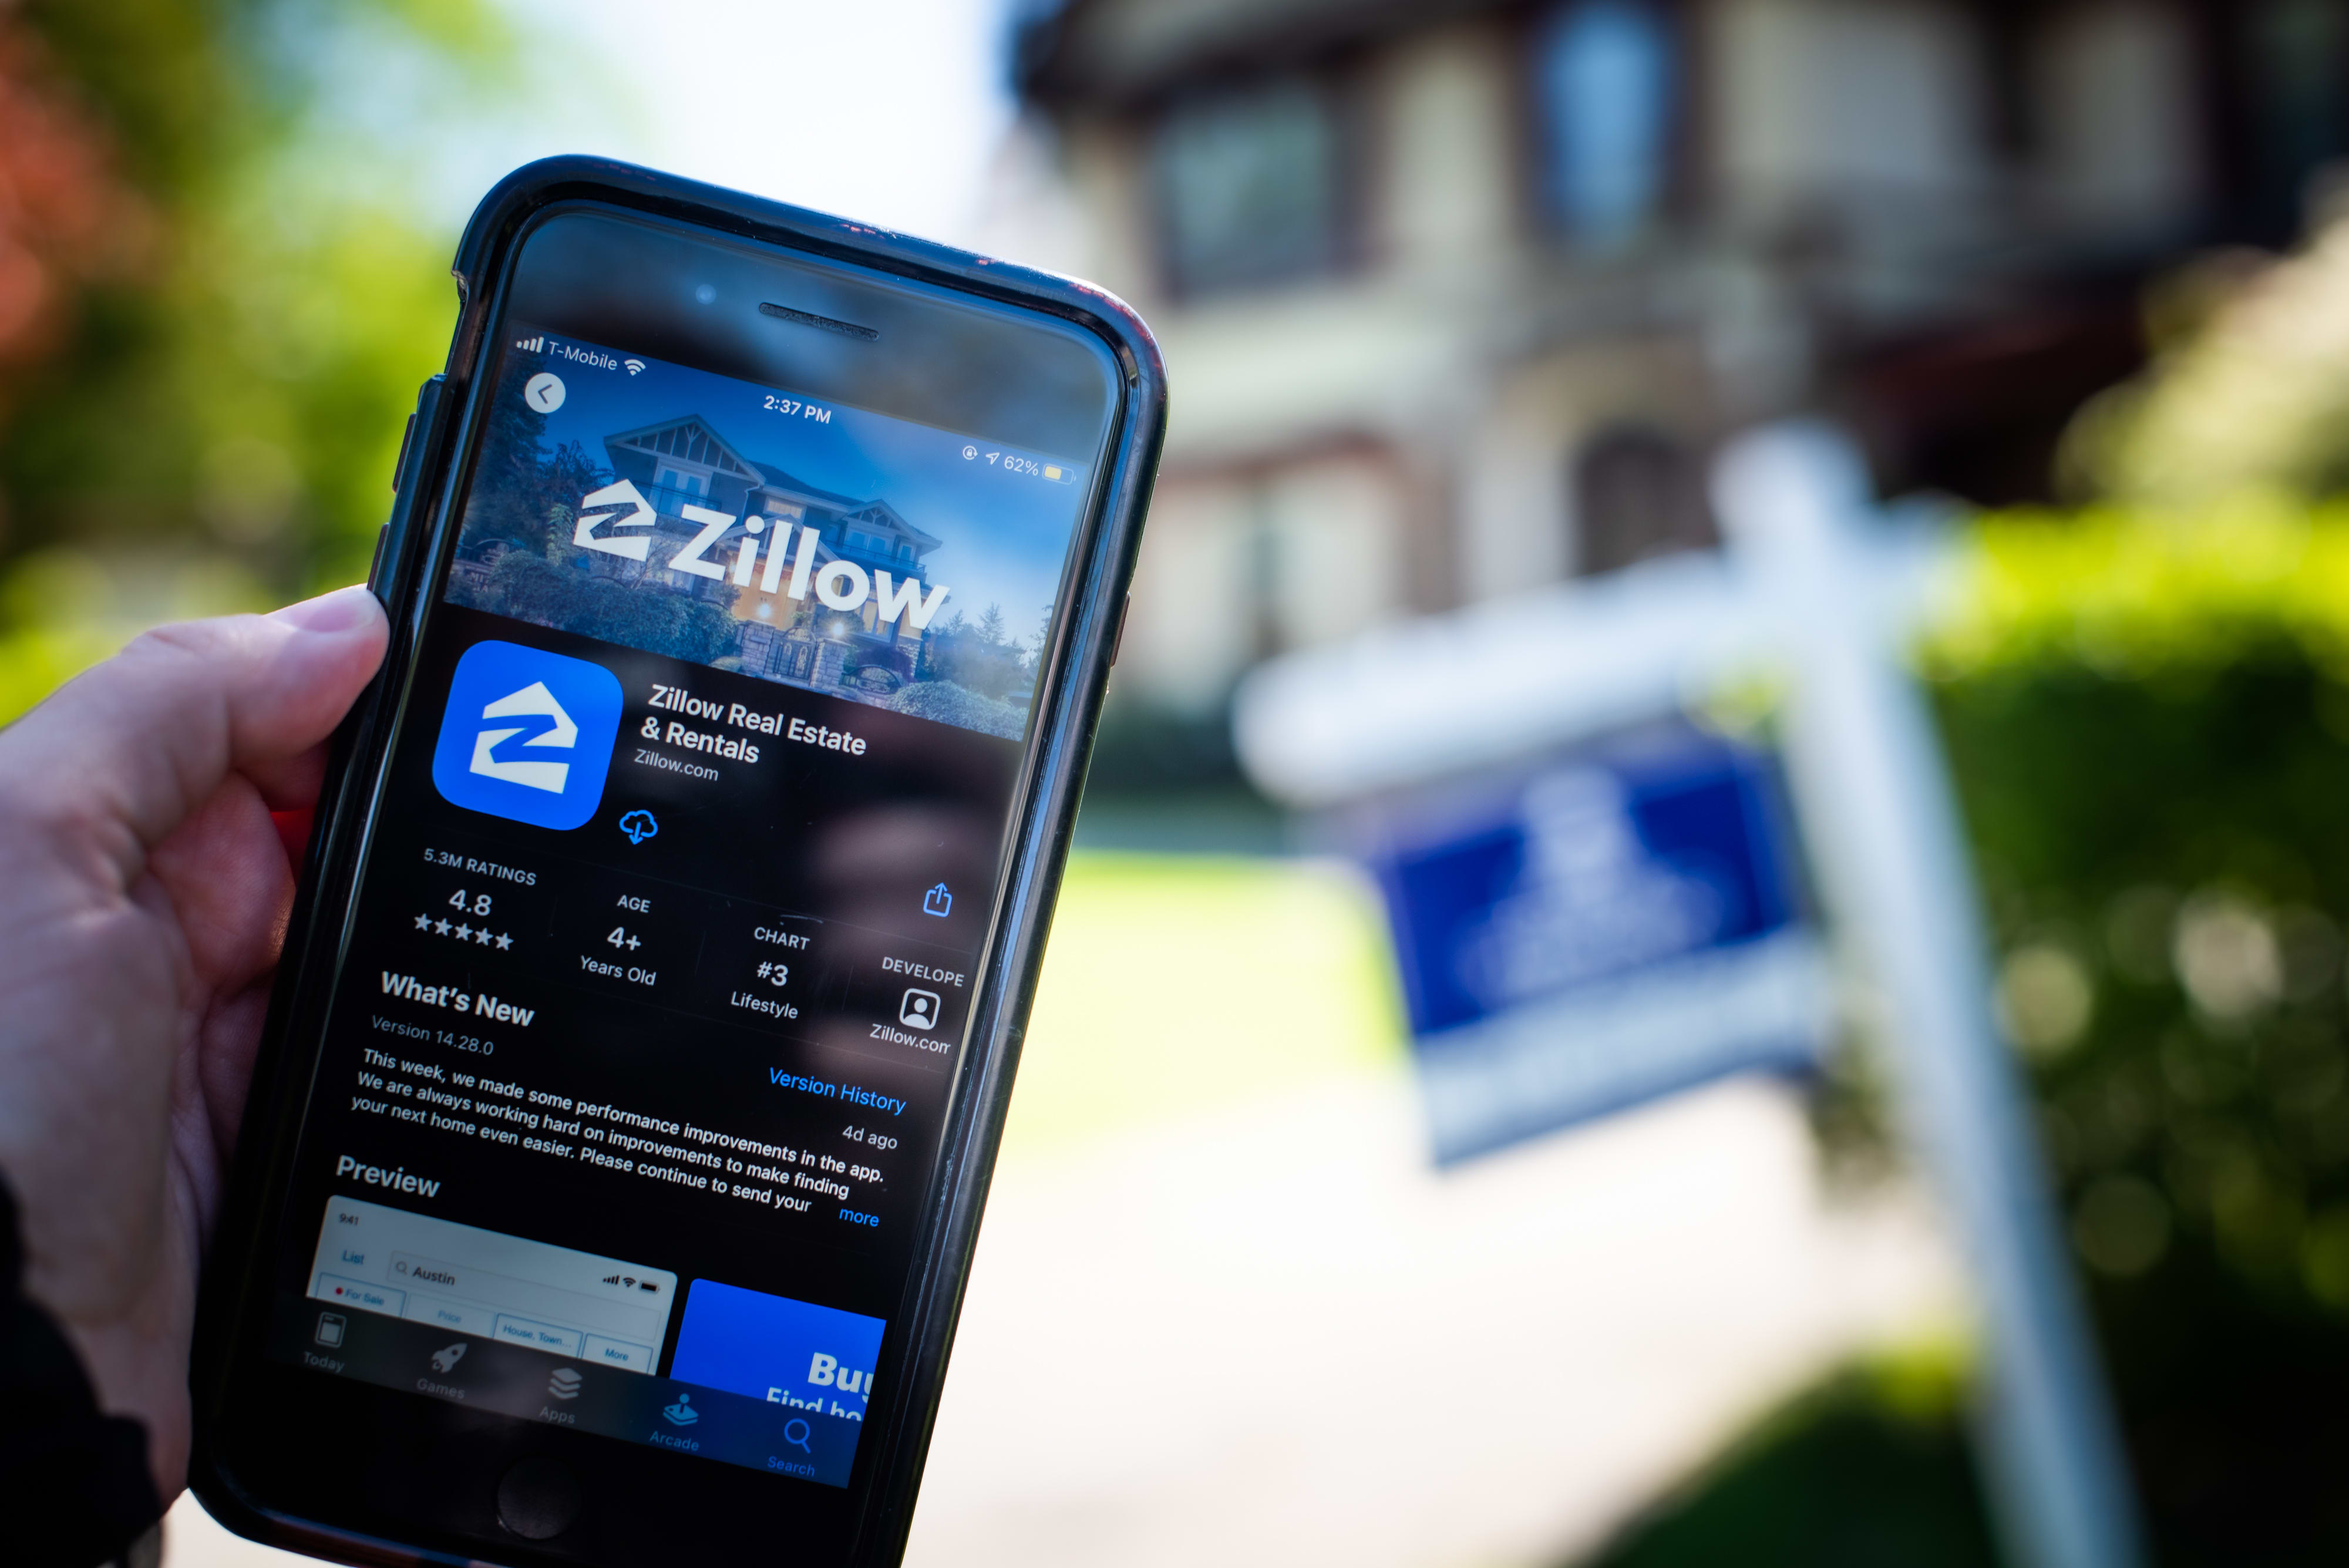 Bank of America double upgrades Zillow, says stock can rise 20{d4d1dfc03659490934346f23c59135b993ced5bc8cc26281e129c43fe68630c9} on improved growth outlook